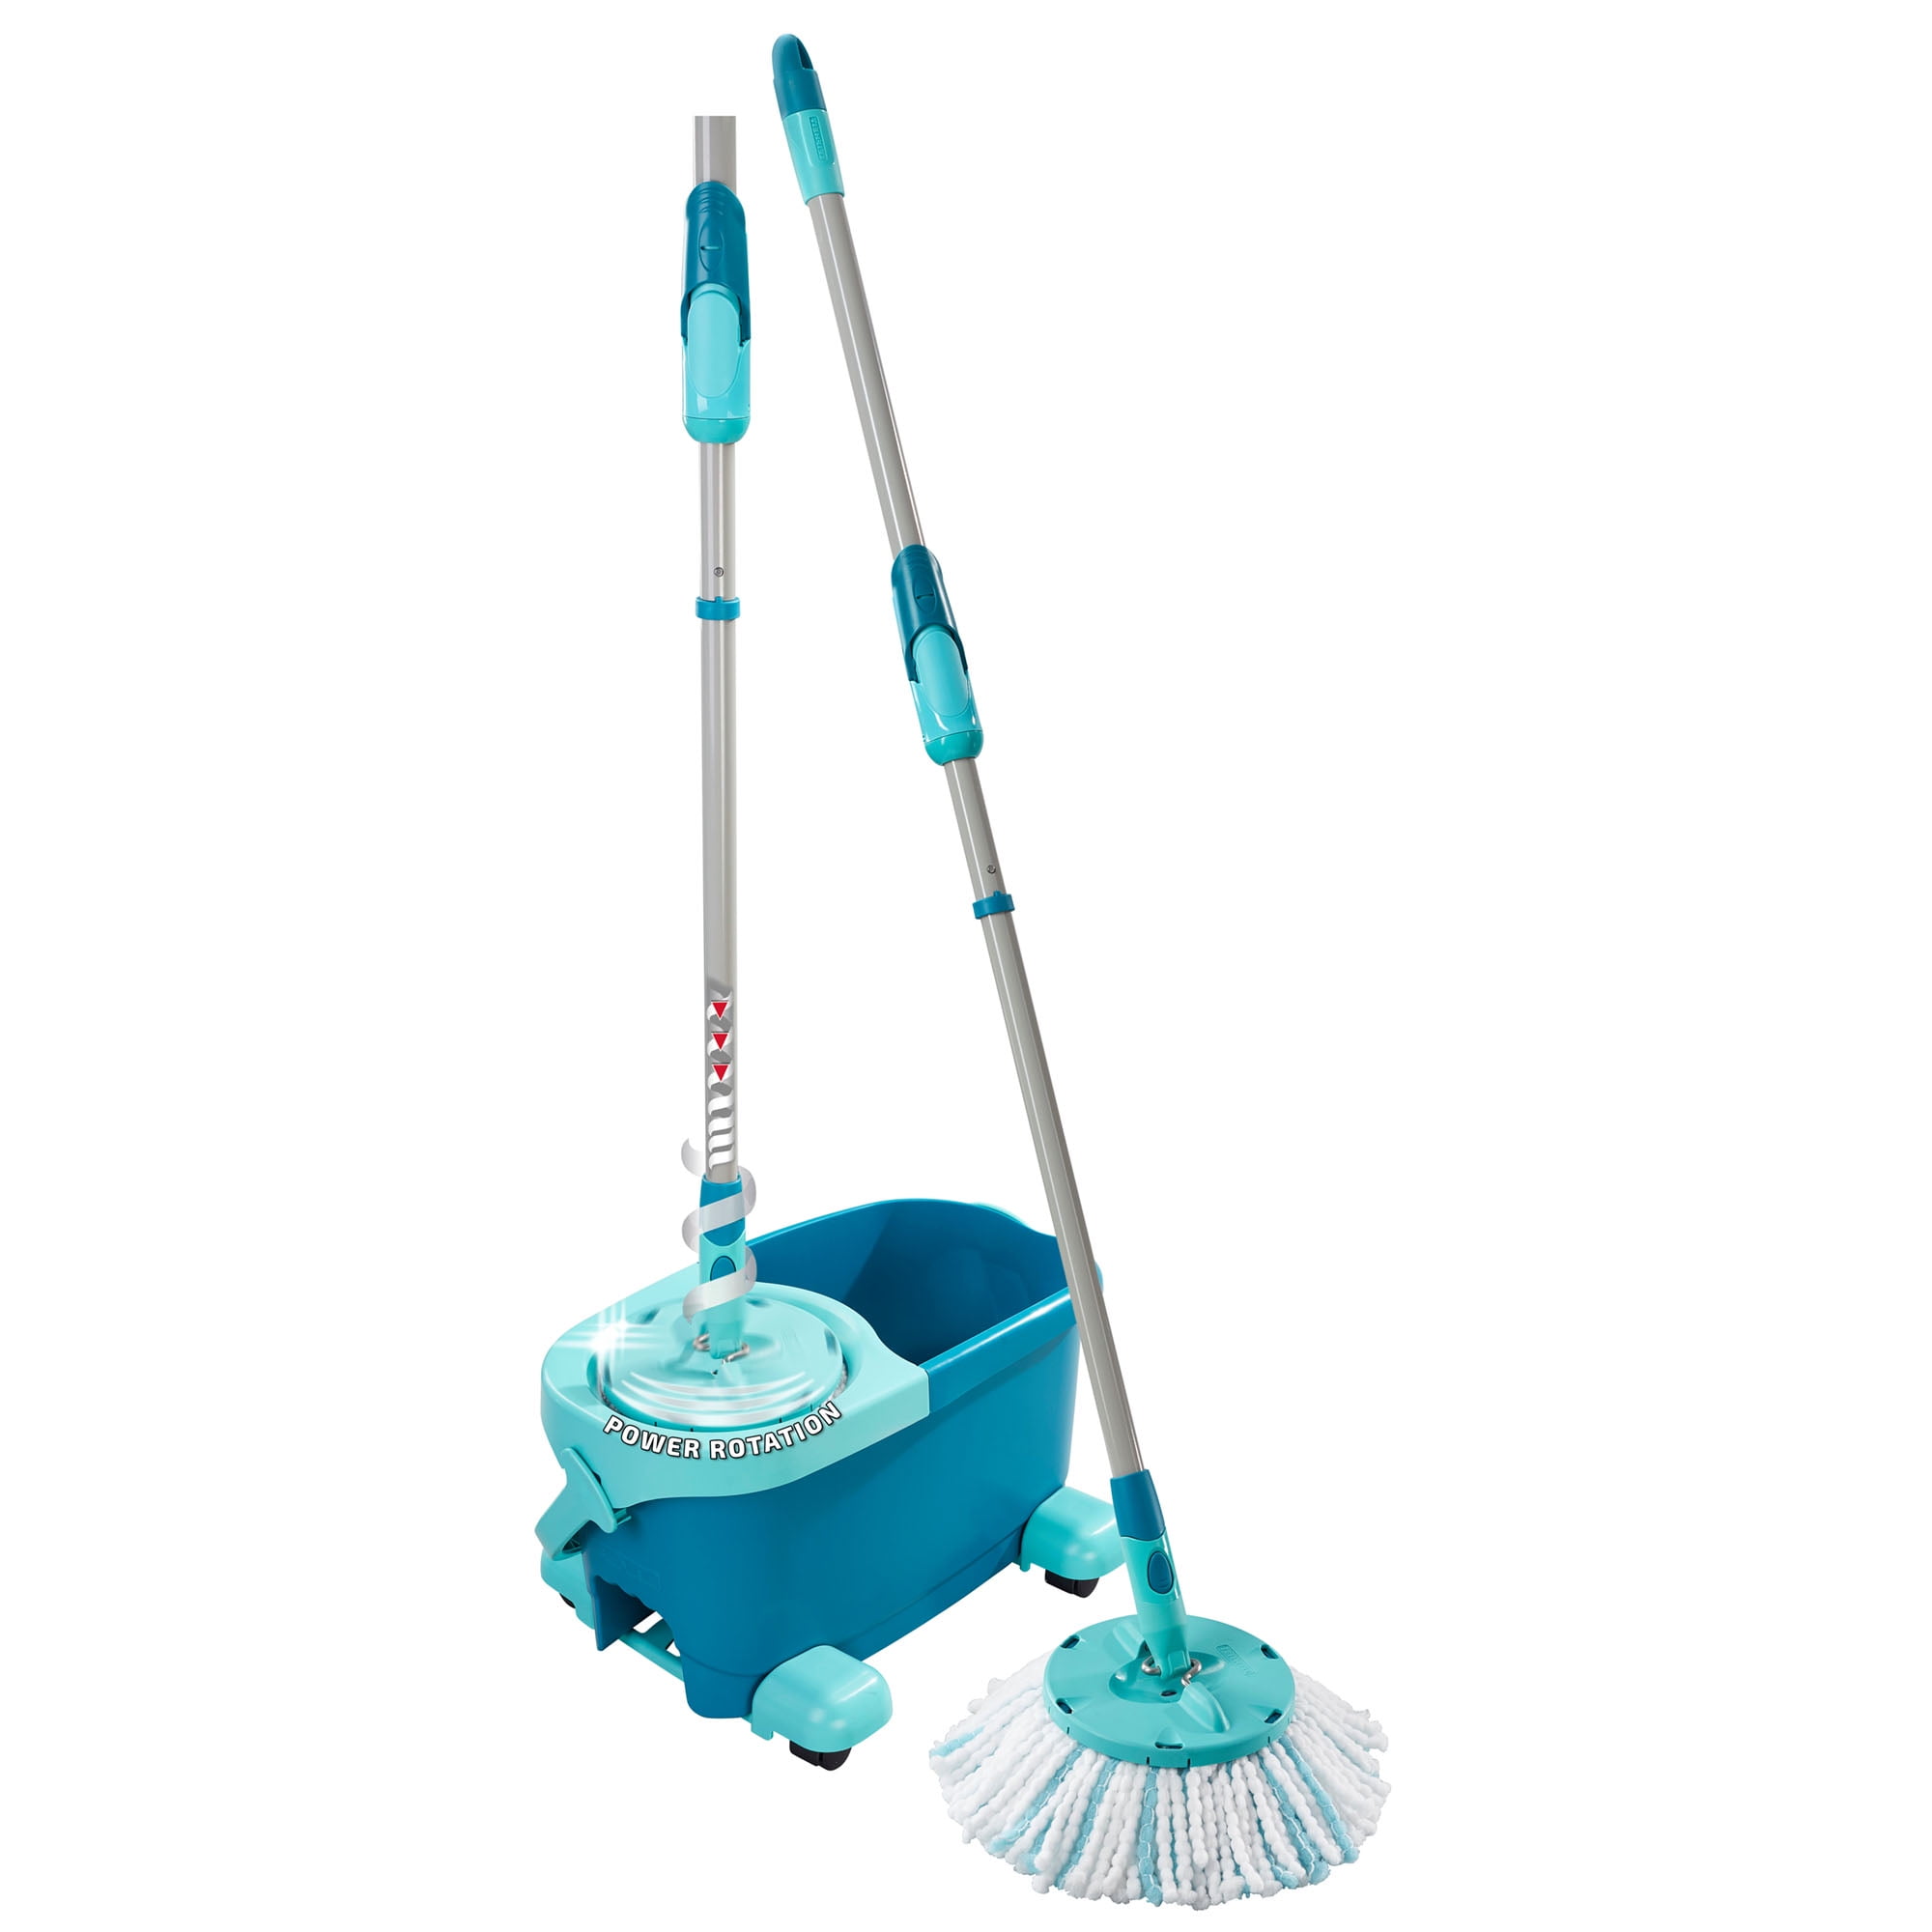 Clean Twist Ergo Mop Set!, Everything you need to know about Leifheit  Clean Twist Ergo Mop Set! 🧼✨ Available for €48.95* from leading outlets.  *Recommended Retail Price, By Leifheit Malta